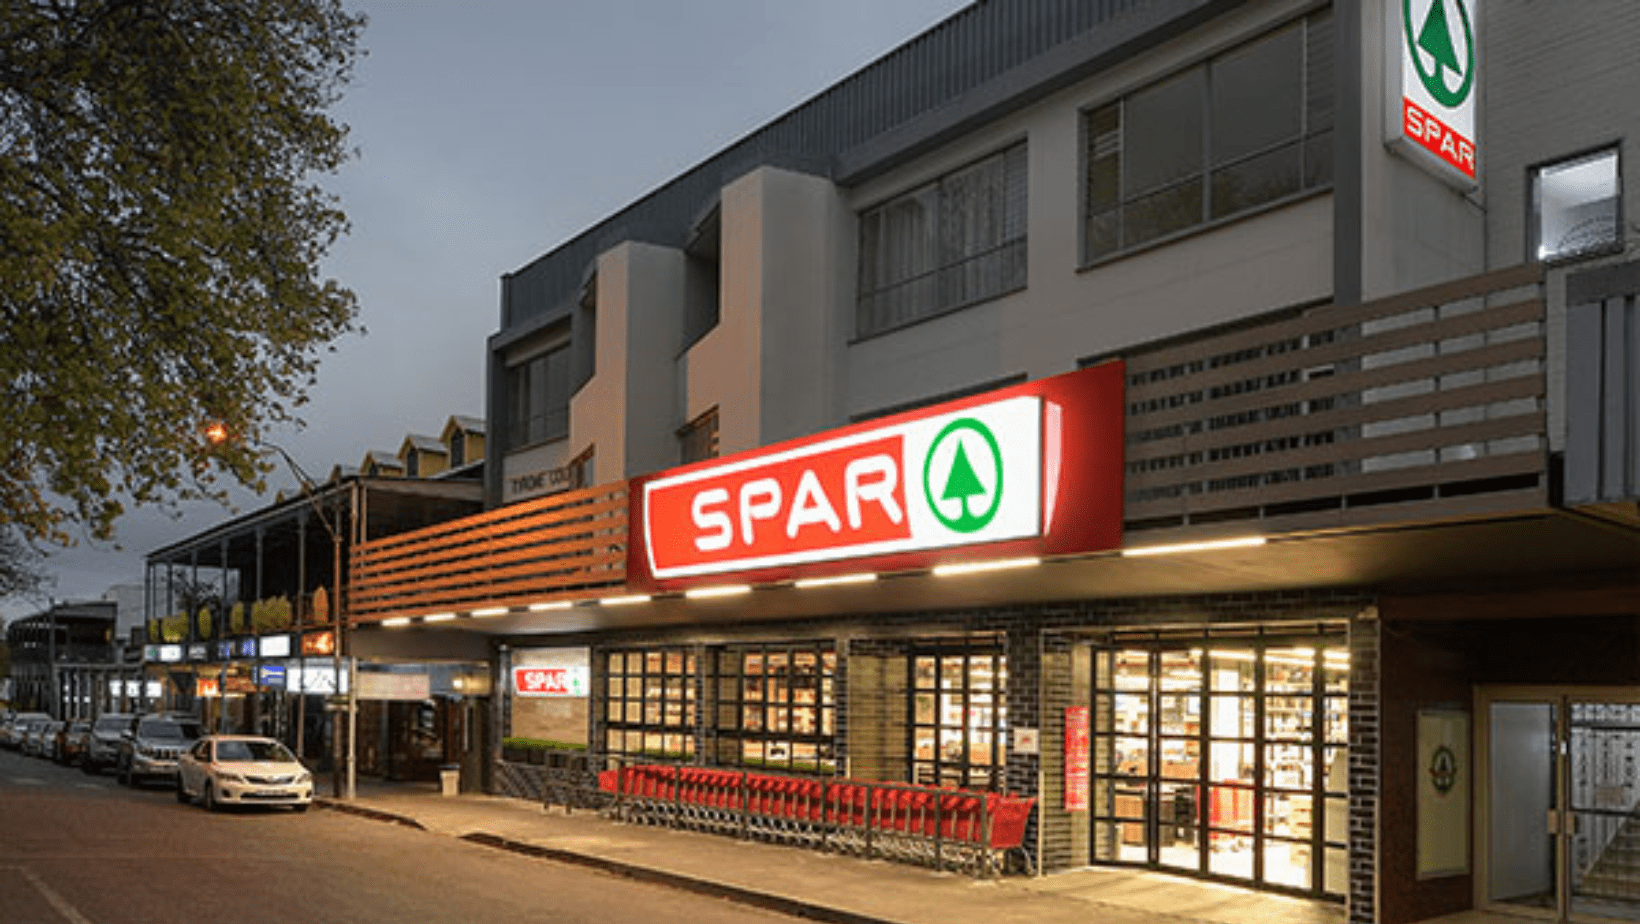 SPAR’s Strategic Moves: Director Awards and CSP Transactions